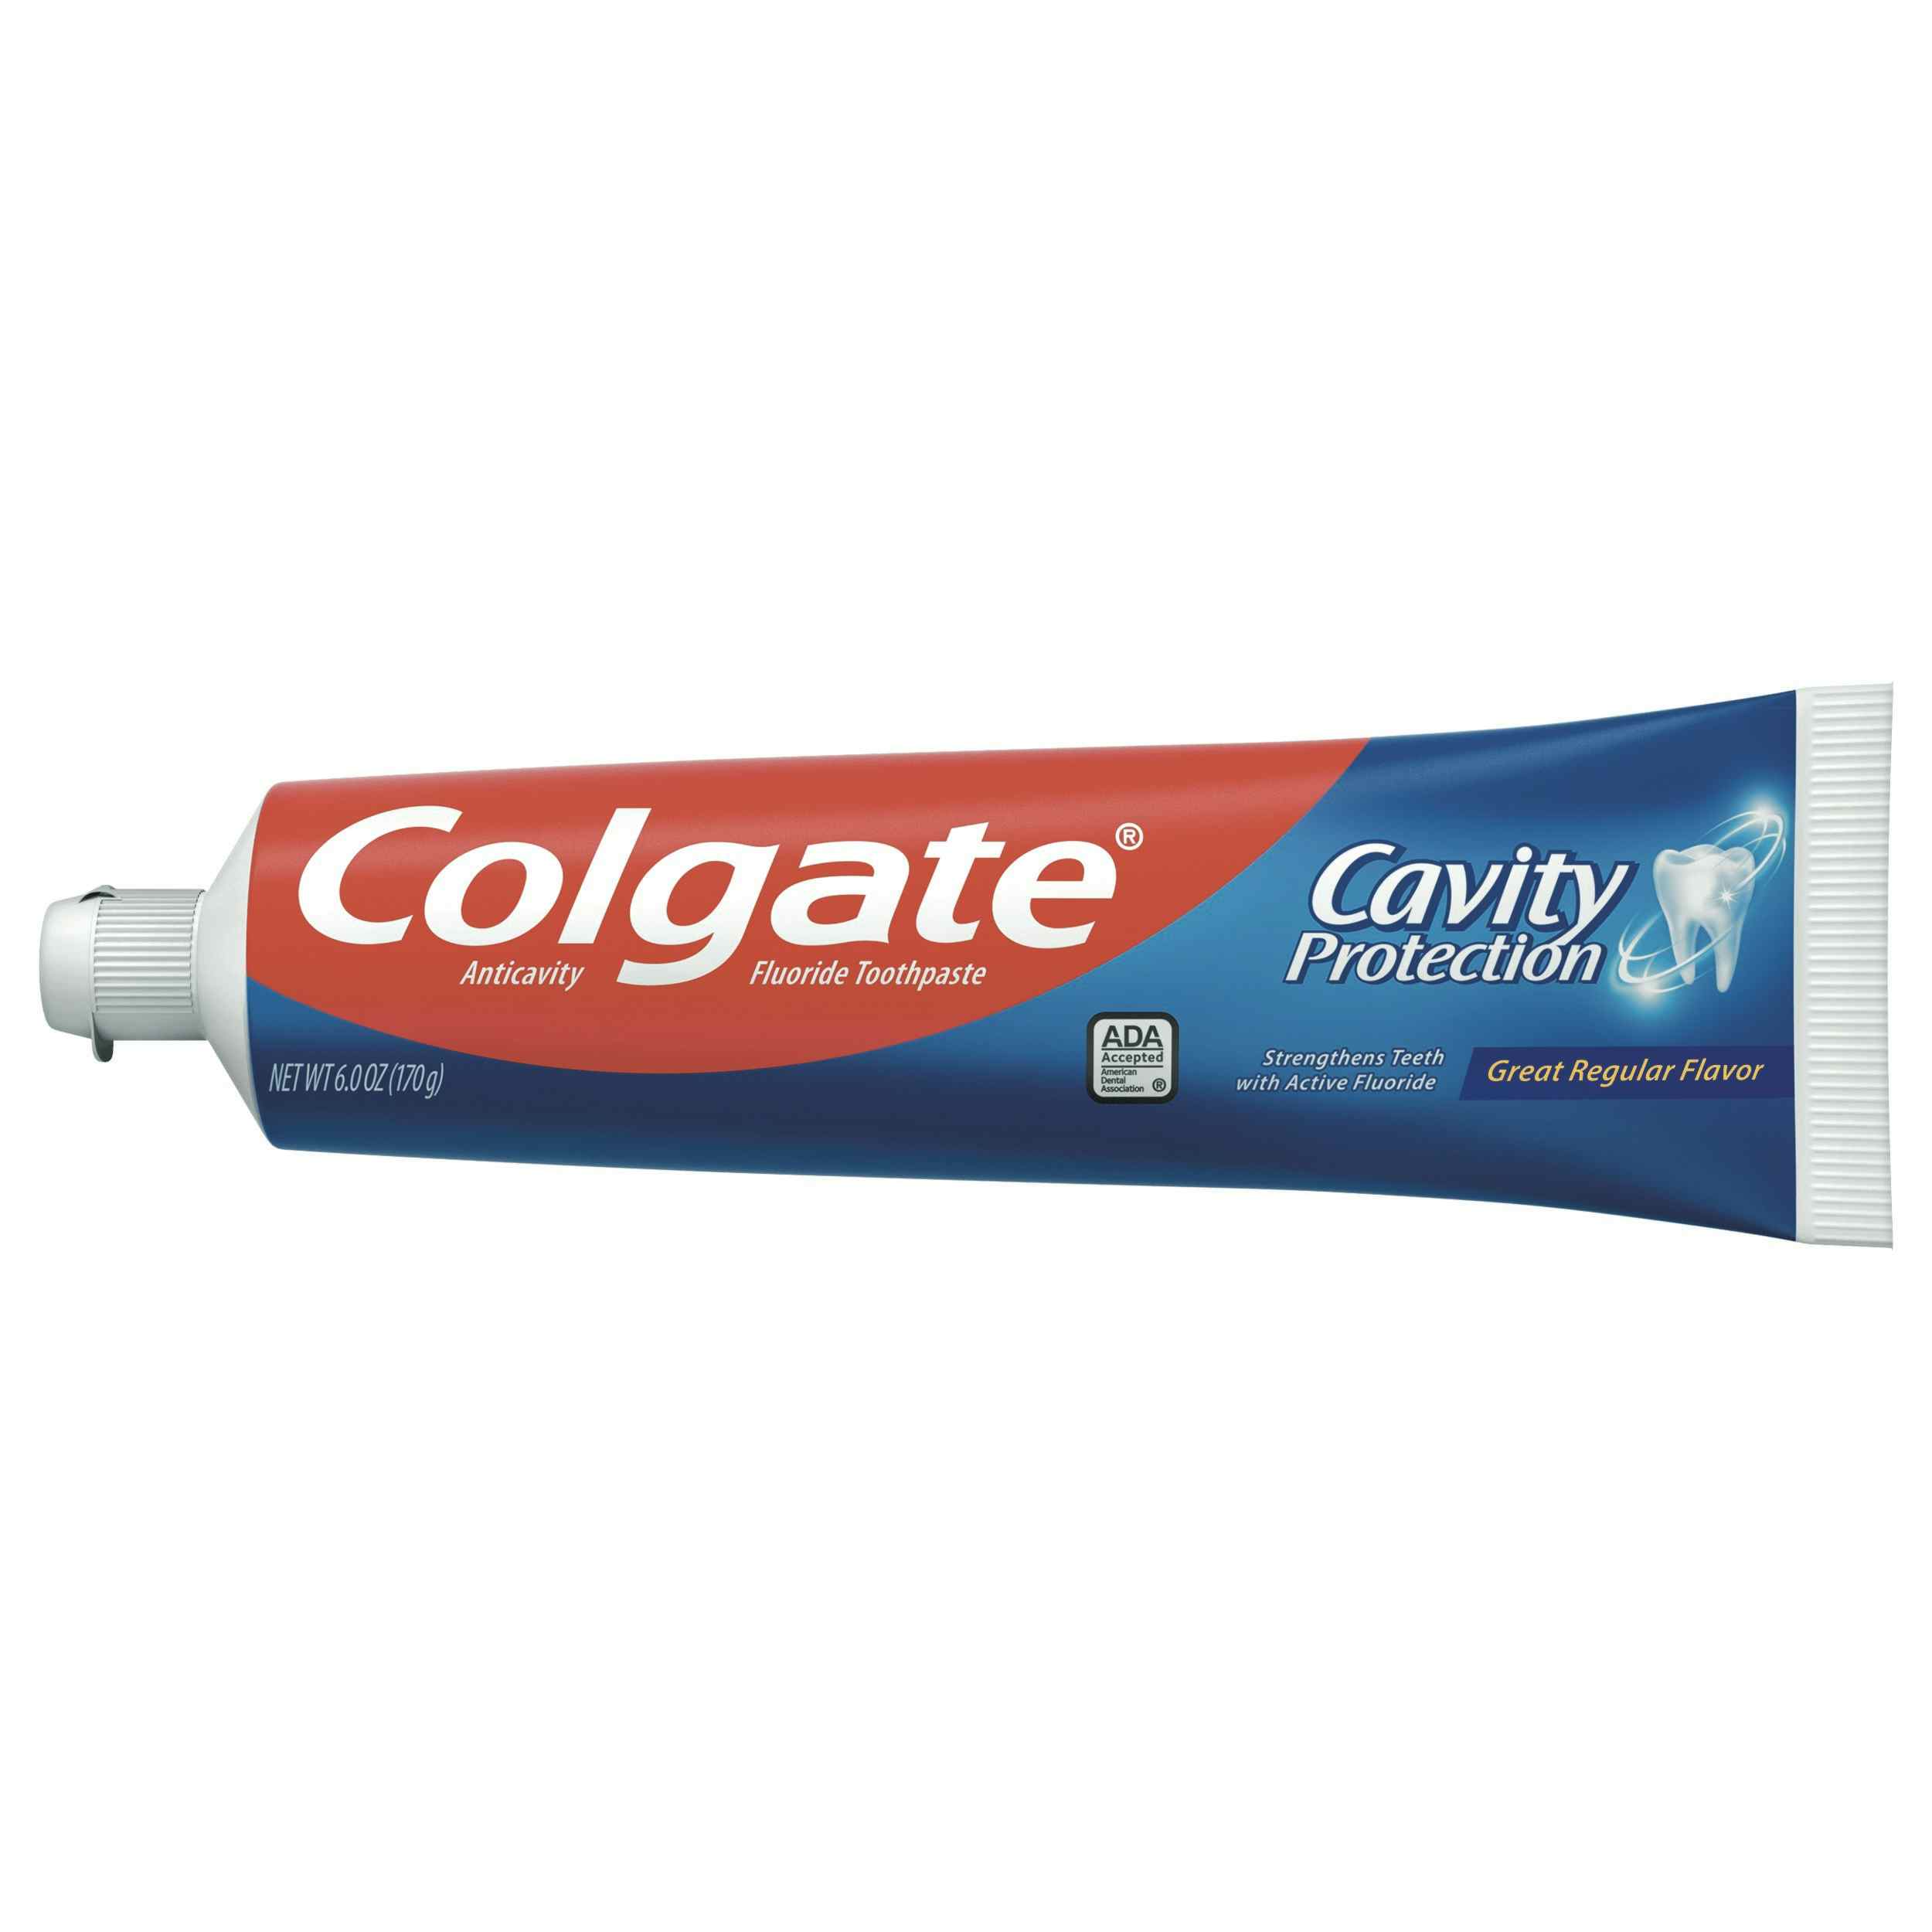 Colgate Toothpaste Cavity Protection Regular, Flavor, 6 oz., Tube, 151088, Case of 24 Tubes